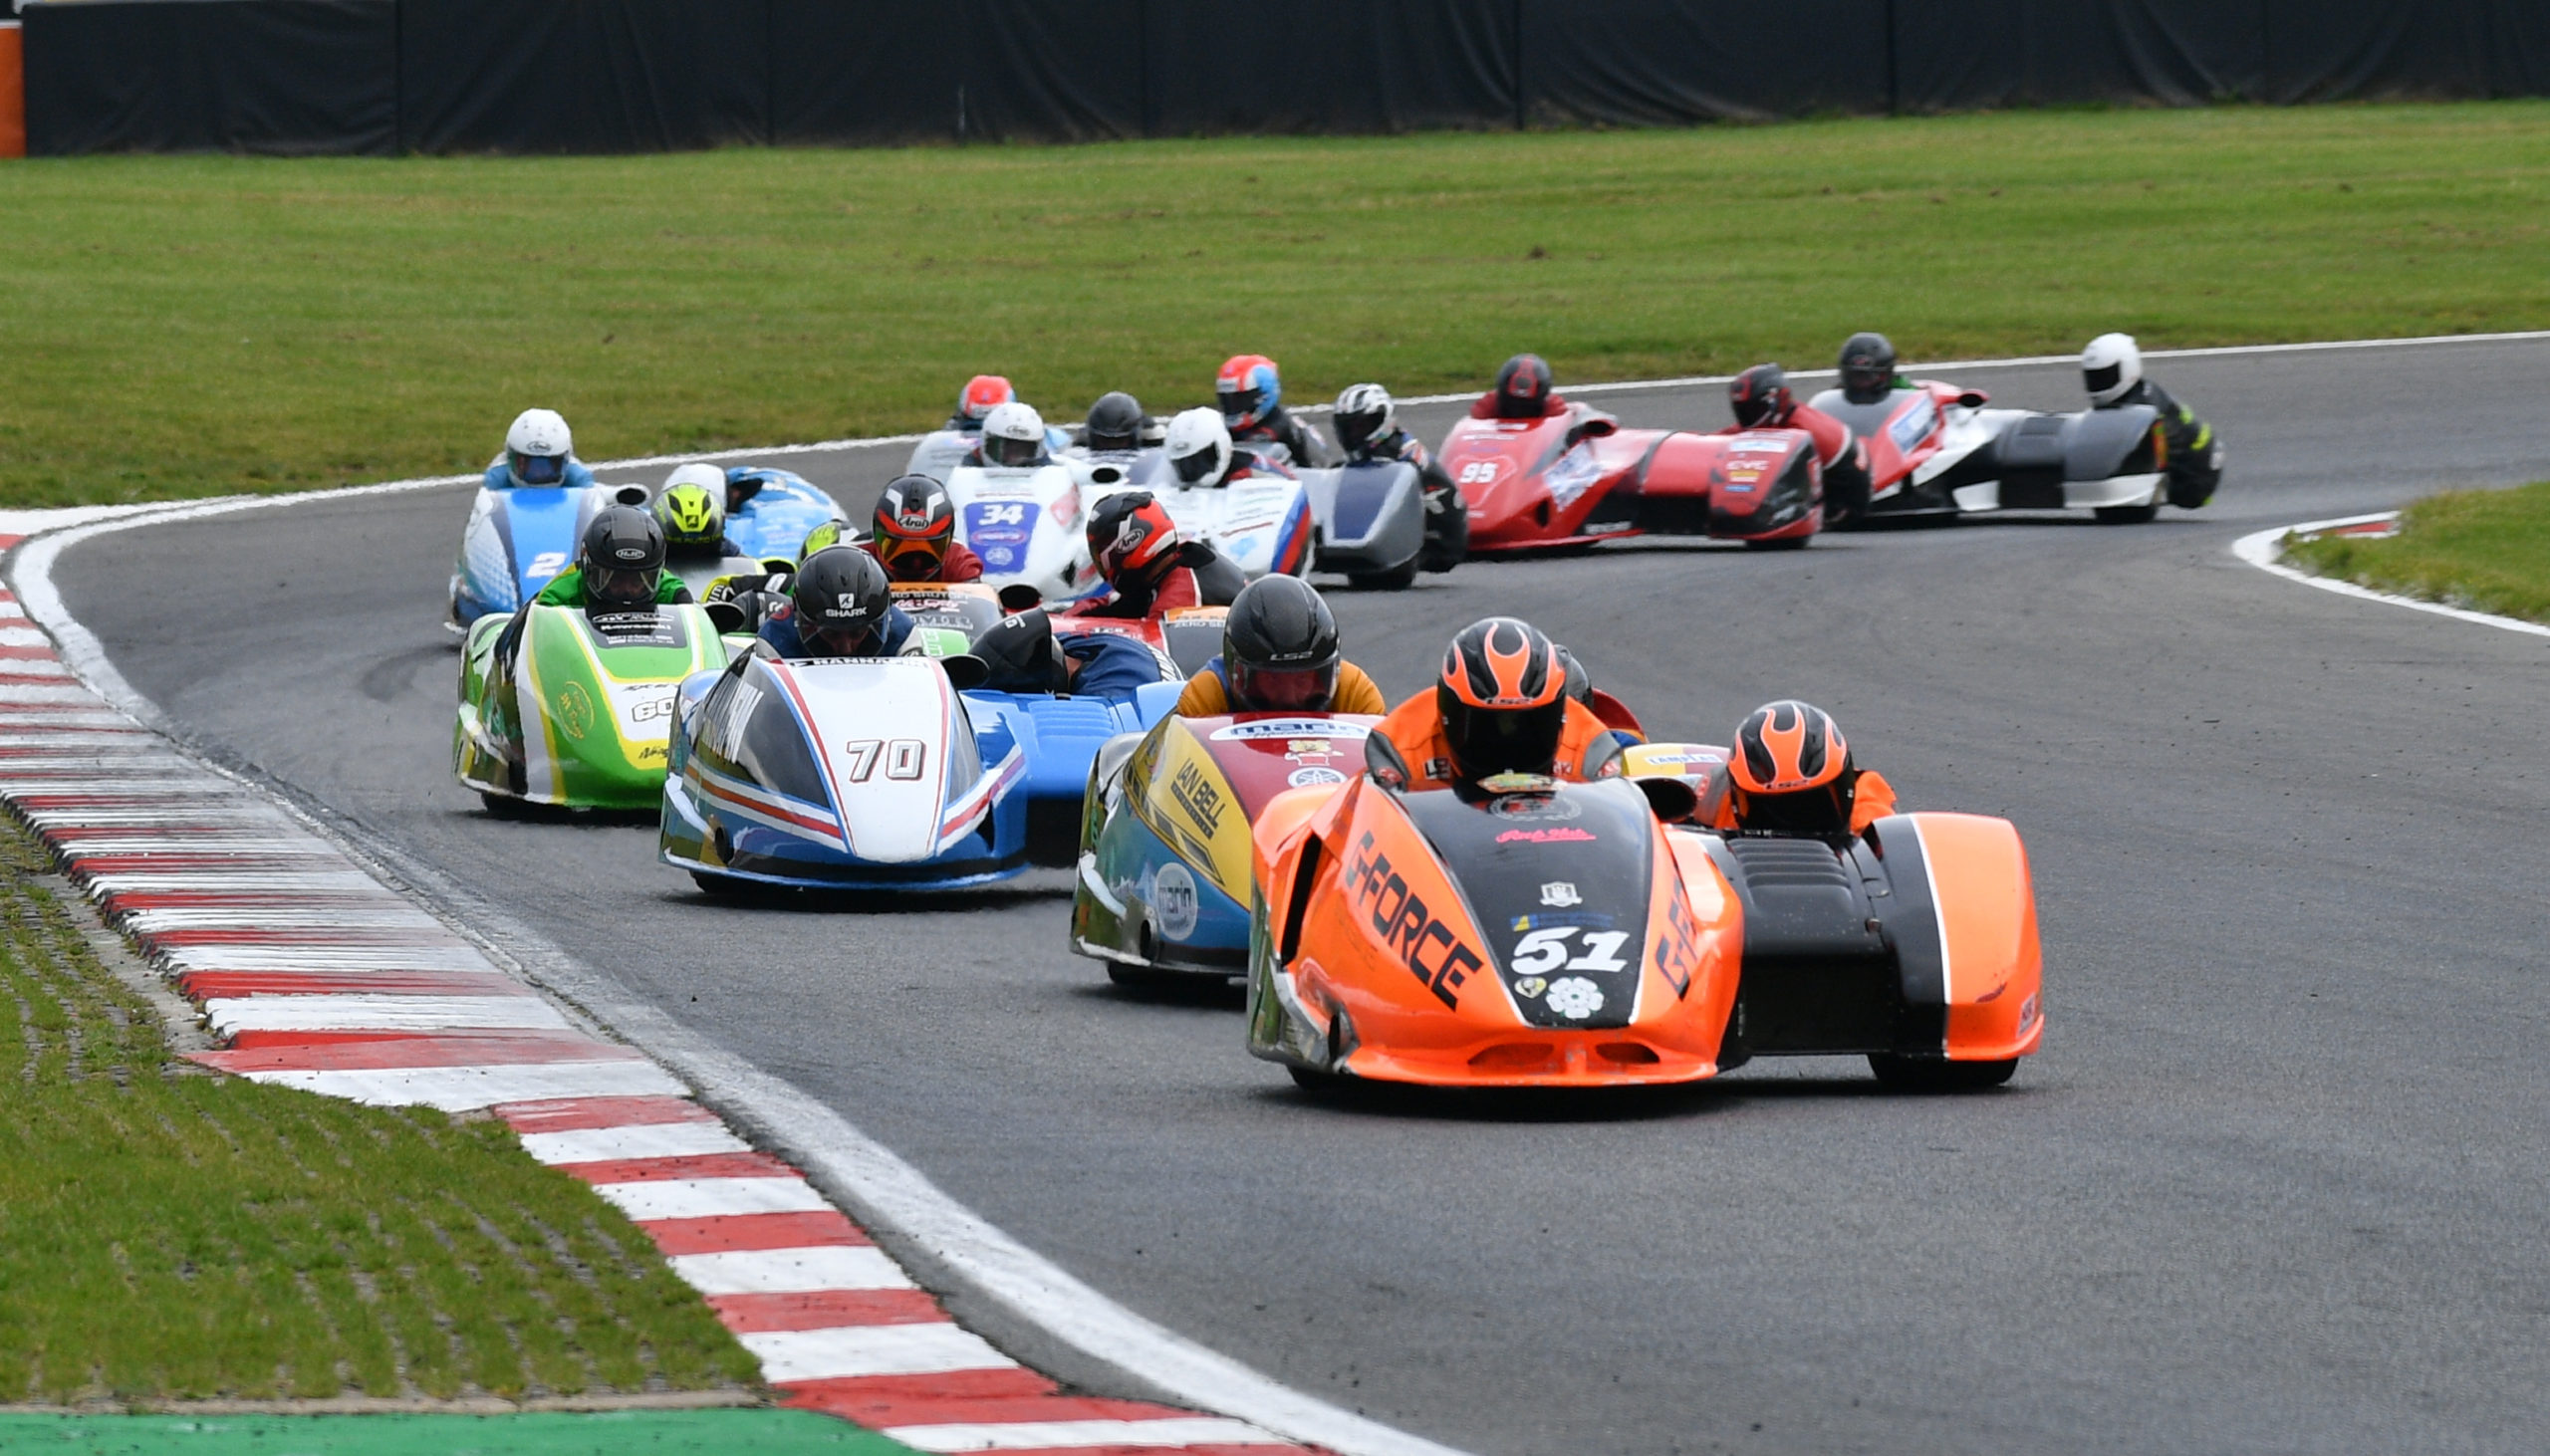 Sidecar action from Brands Hatch